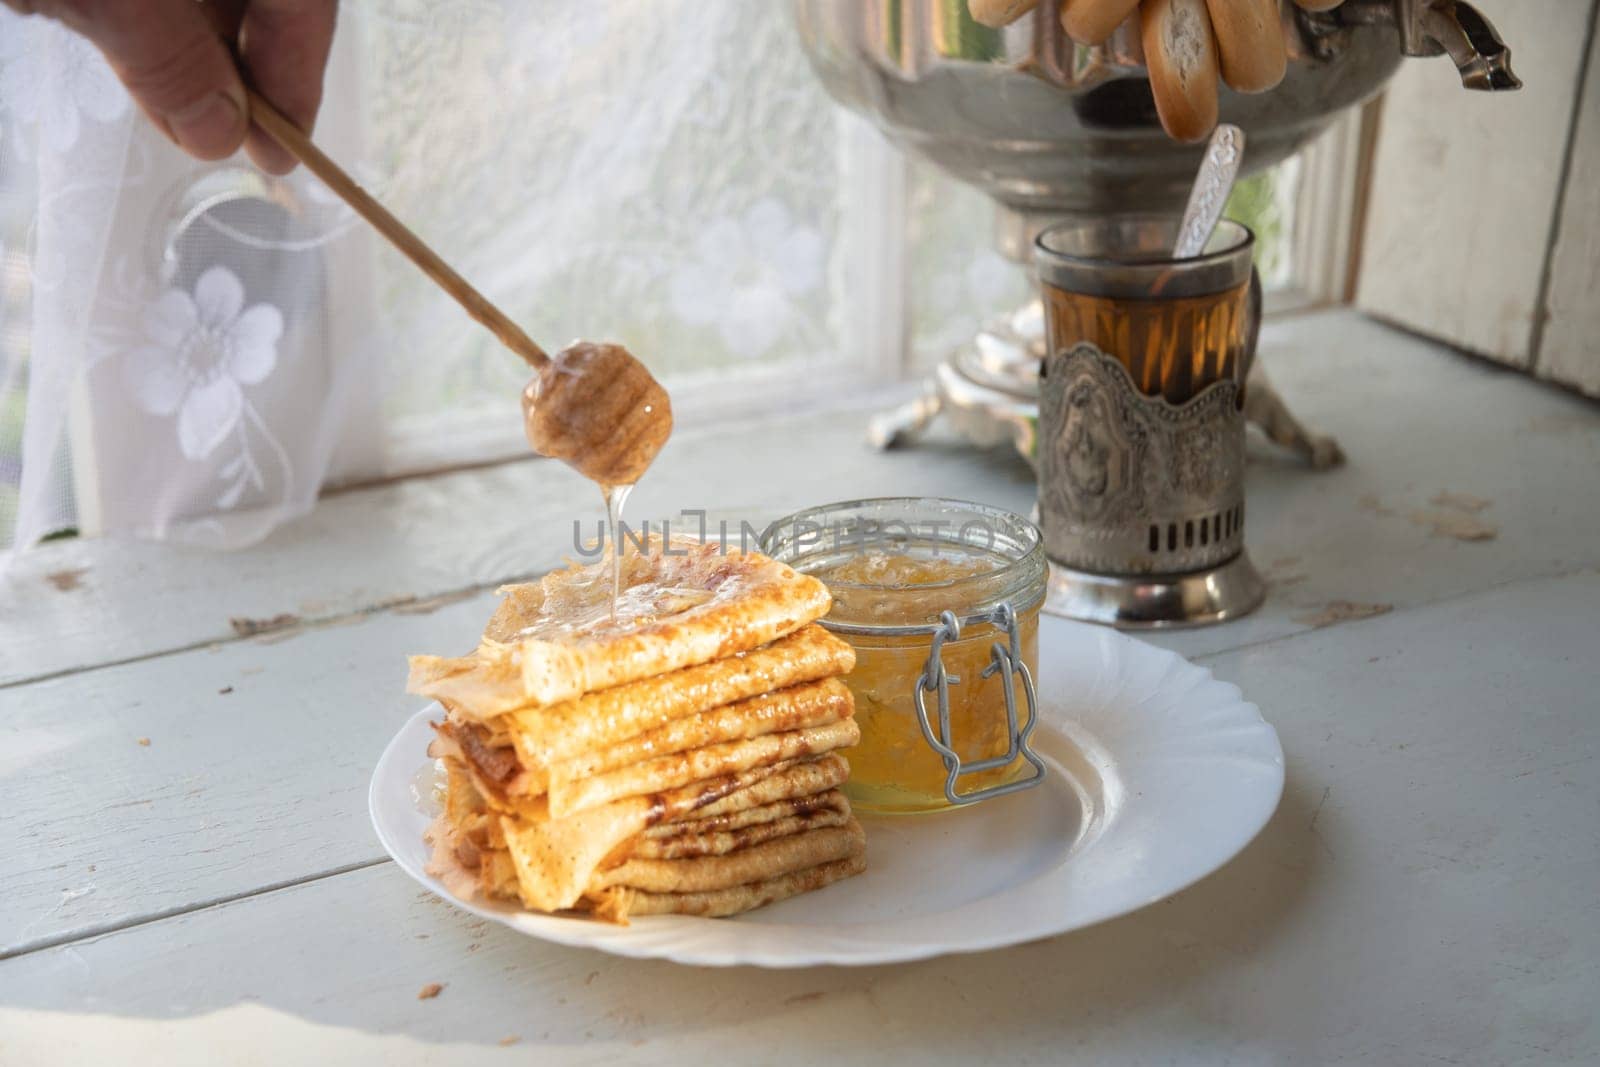 Russian pancakes with honey and a cup of tea from a vintage samovar Maslenitsa festival concept by KaterinaDalemans